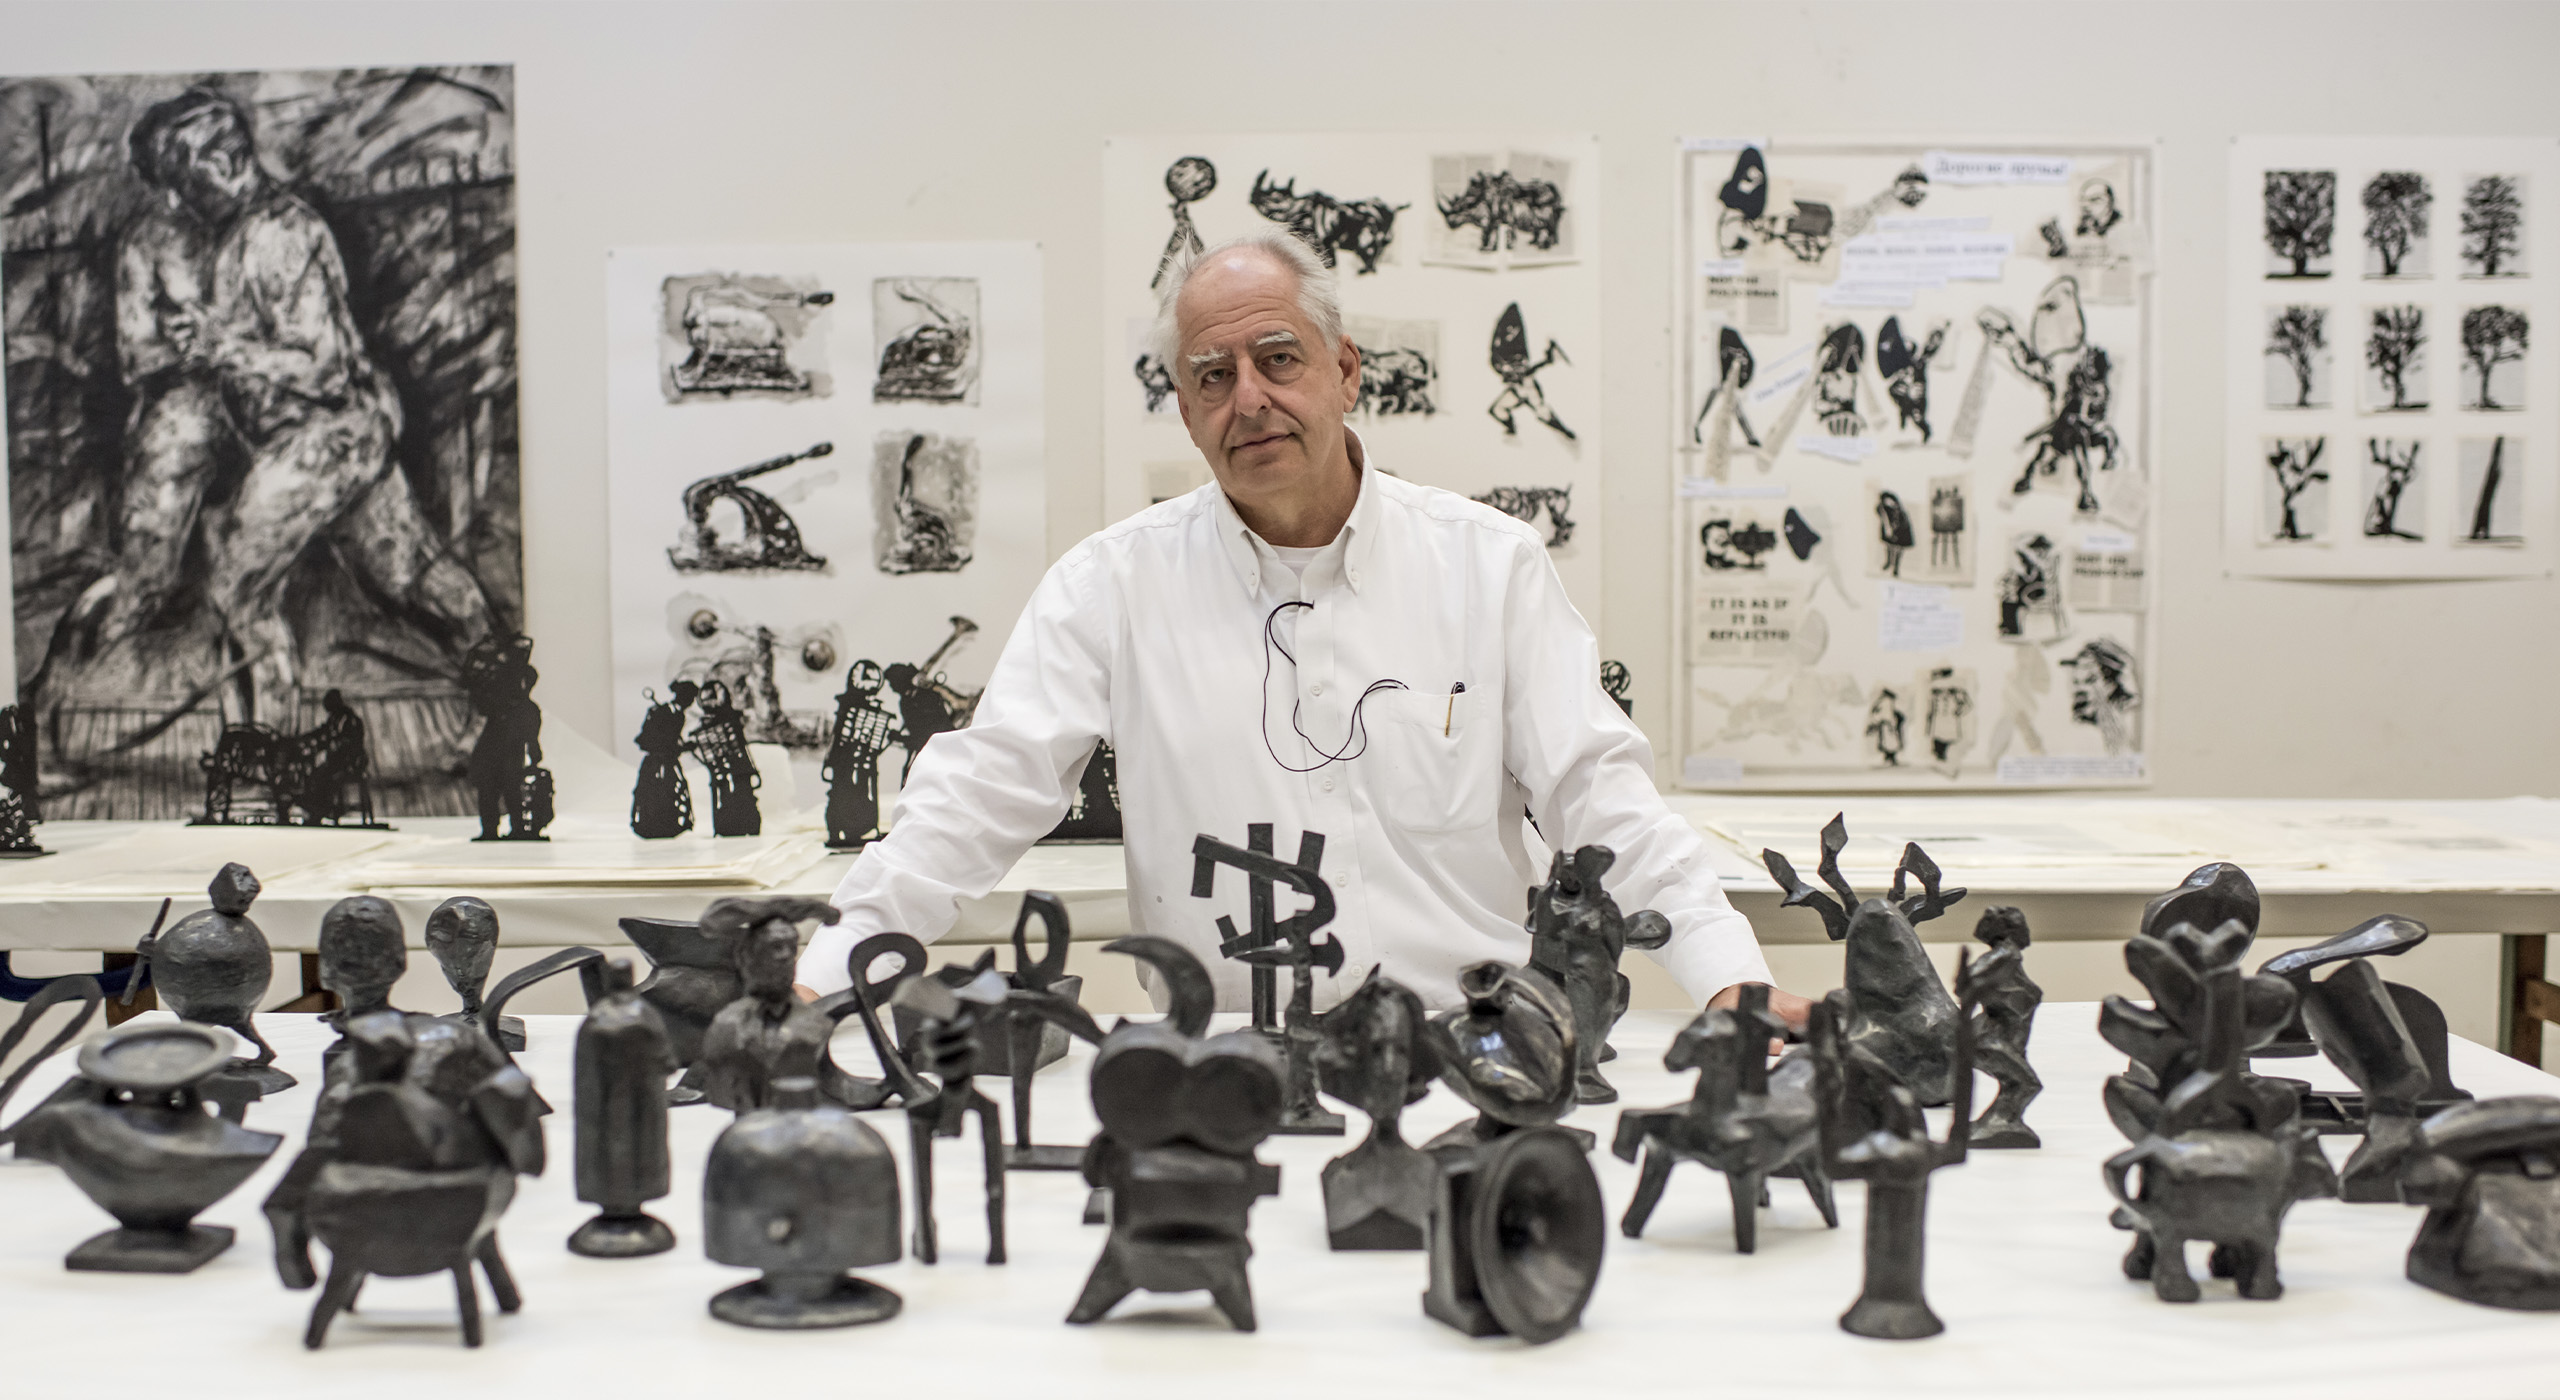 A mature man with white hair stares forward surrounded by details illustrations and sculptures.